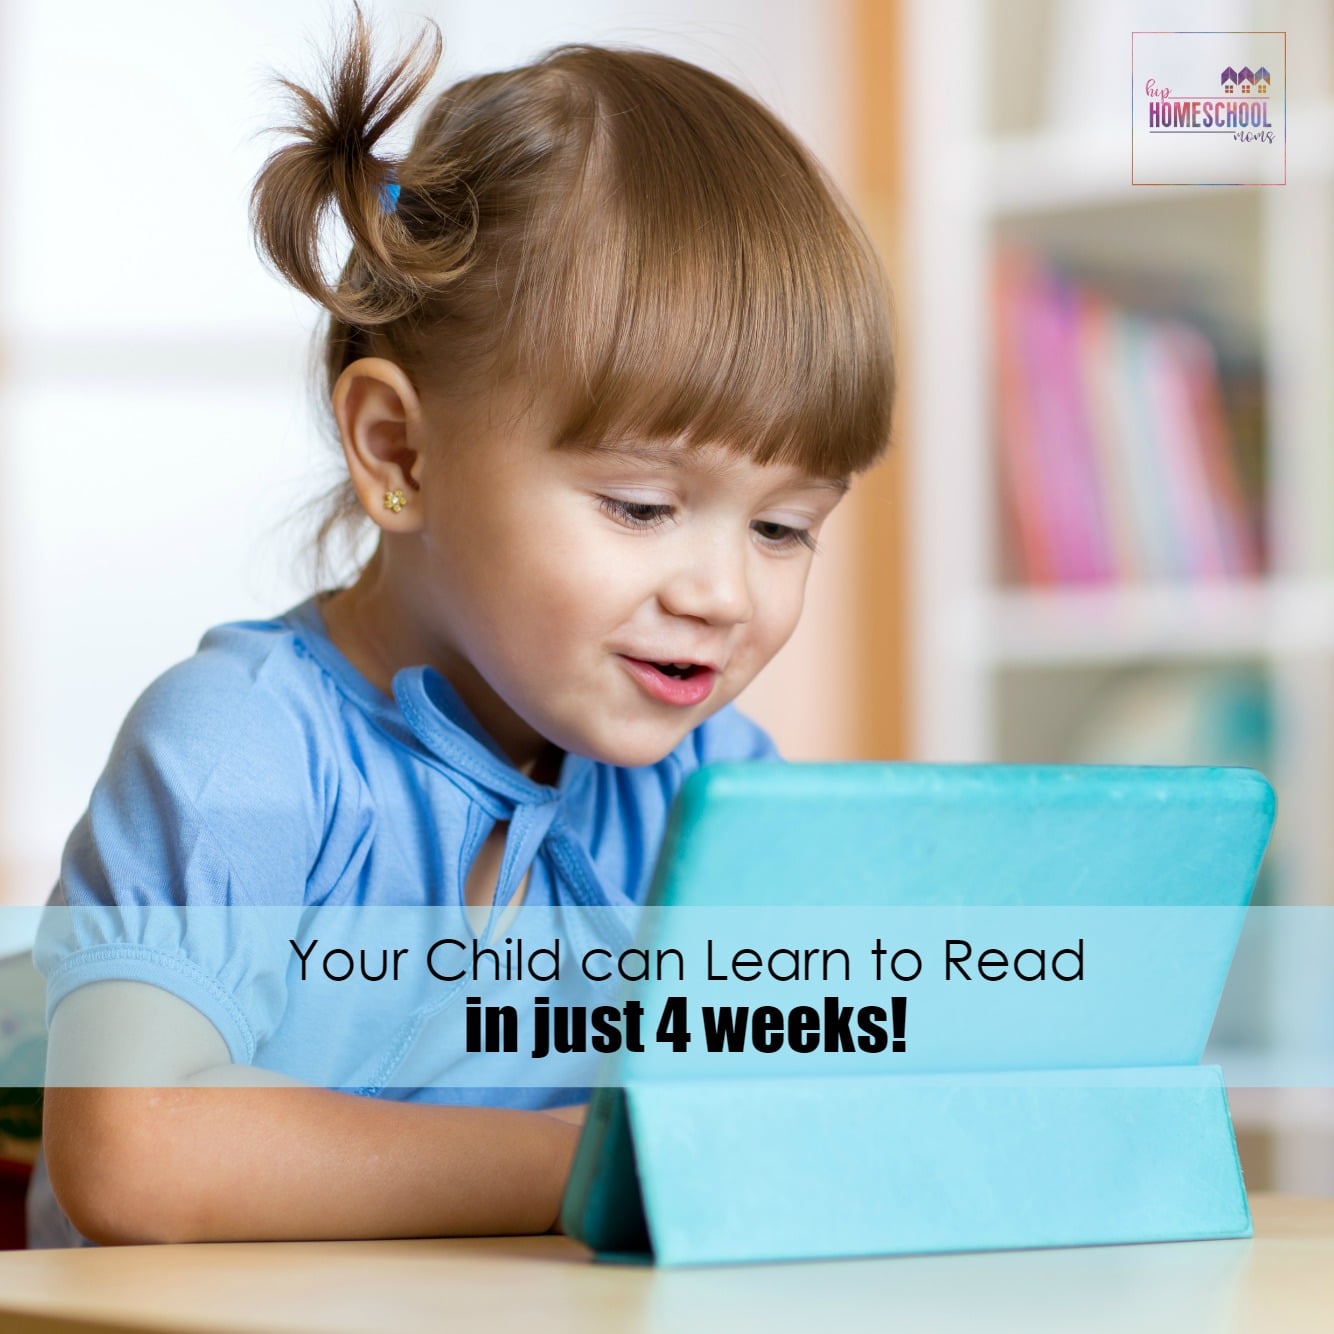 Your Child Can Learn to Read in Just 4 Weeks!